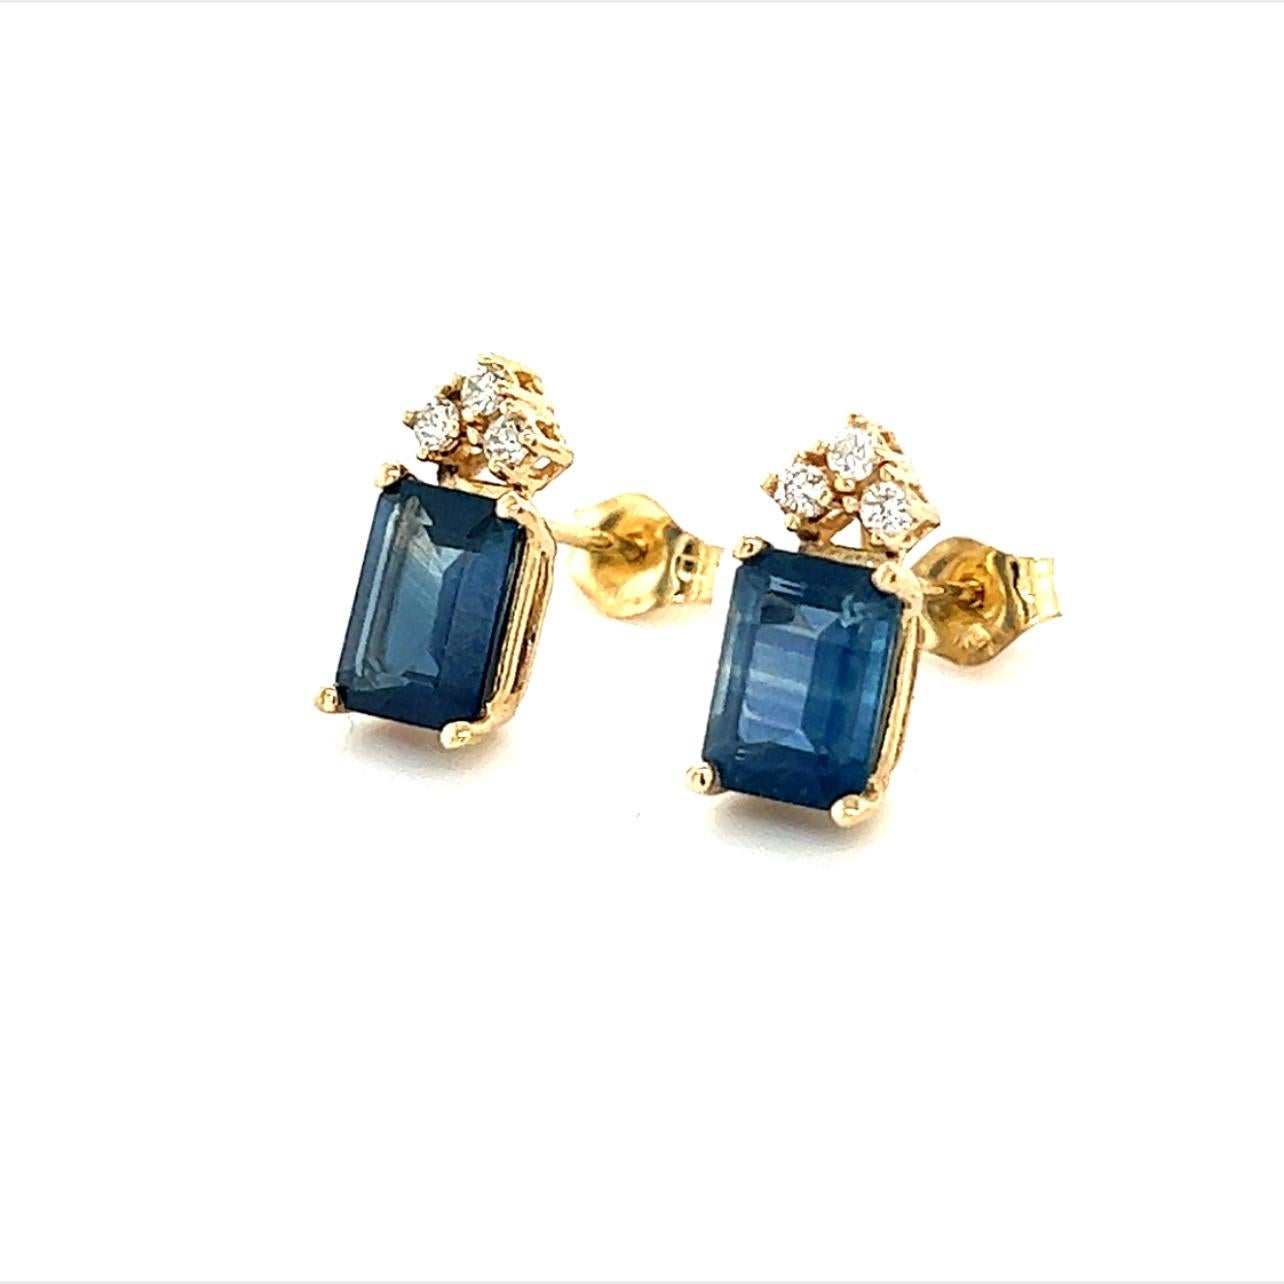 Natural Sapphire Diamond Earrings 14k Gold 2.14 TCW Certified For Sale 5